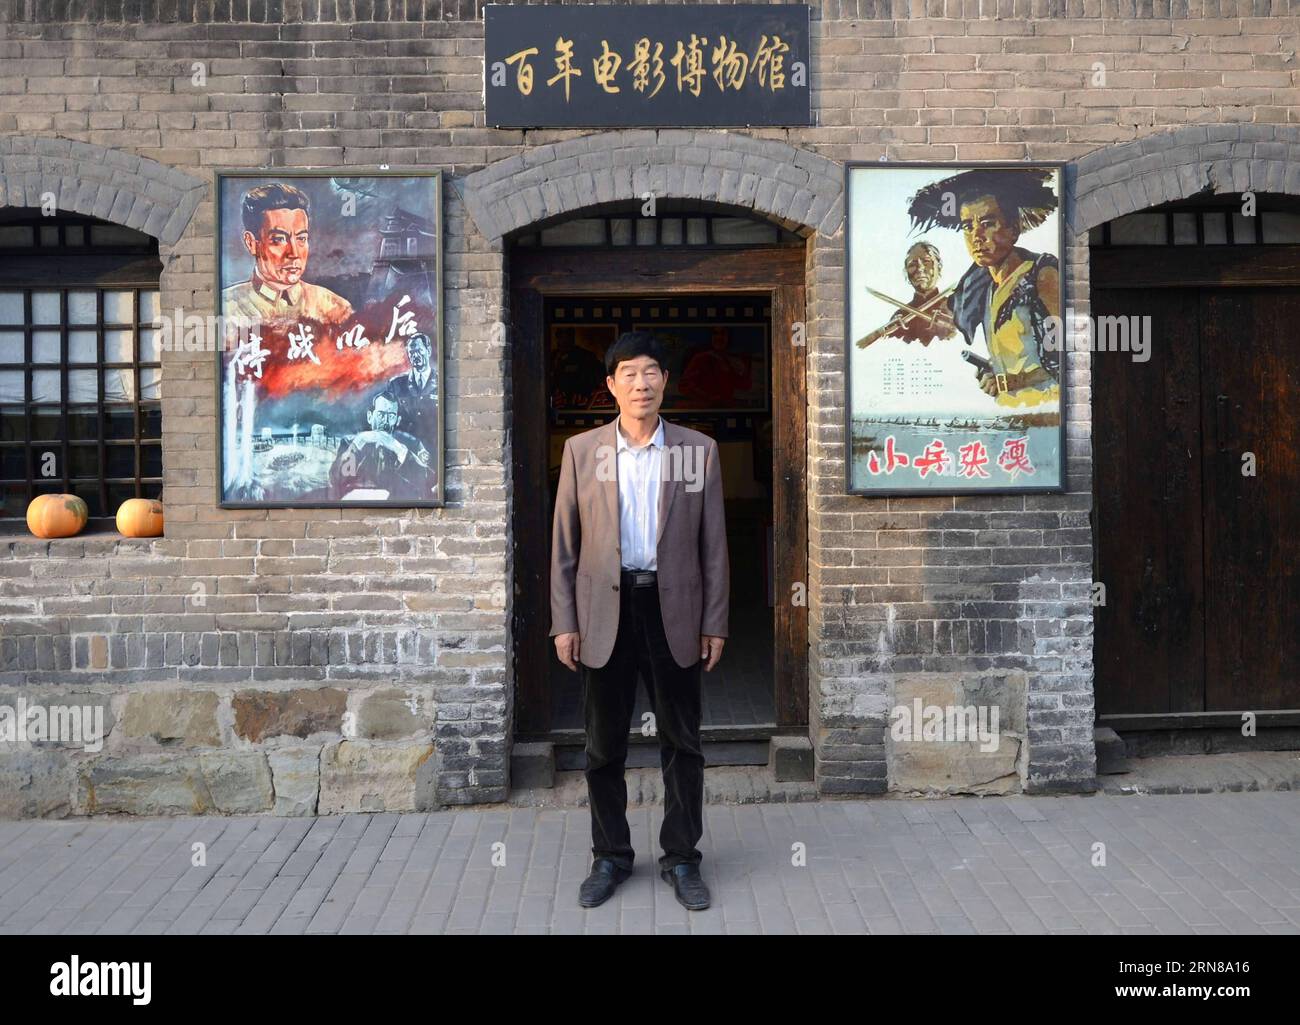 SHIJIAZHUANG, Oct. 13, 2015 -- Wei Shaoxian poses for a photo in front of his film museum in Siliugu Village of Handan County, north China s Hebei Province, Oct. 13, 2015. Cinephile Wei Shaoxian collected more than 20,000 items about film, such as filmstrip, poster and record, since 2004 and founded his private film museum in his village in 2015. ) (zkr) CHINA-SHIJIAZHUANG-FILM MUSEUM(CN) WangxXiao PUBLICATIONxNOTxINxCHN   Shijiazhuang OCT 13 2015 Wei  Poses for a Photo in Front of His Film Museum in  Village of Handan County North China S Hebei Province OCT 13 2015  Wei  collected More than 2 Stock Photo